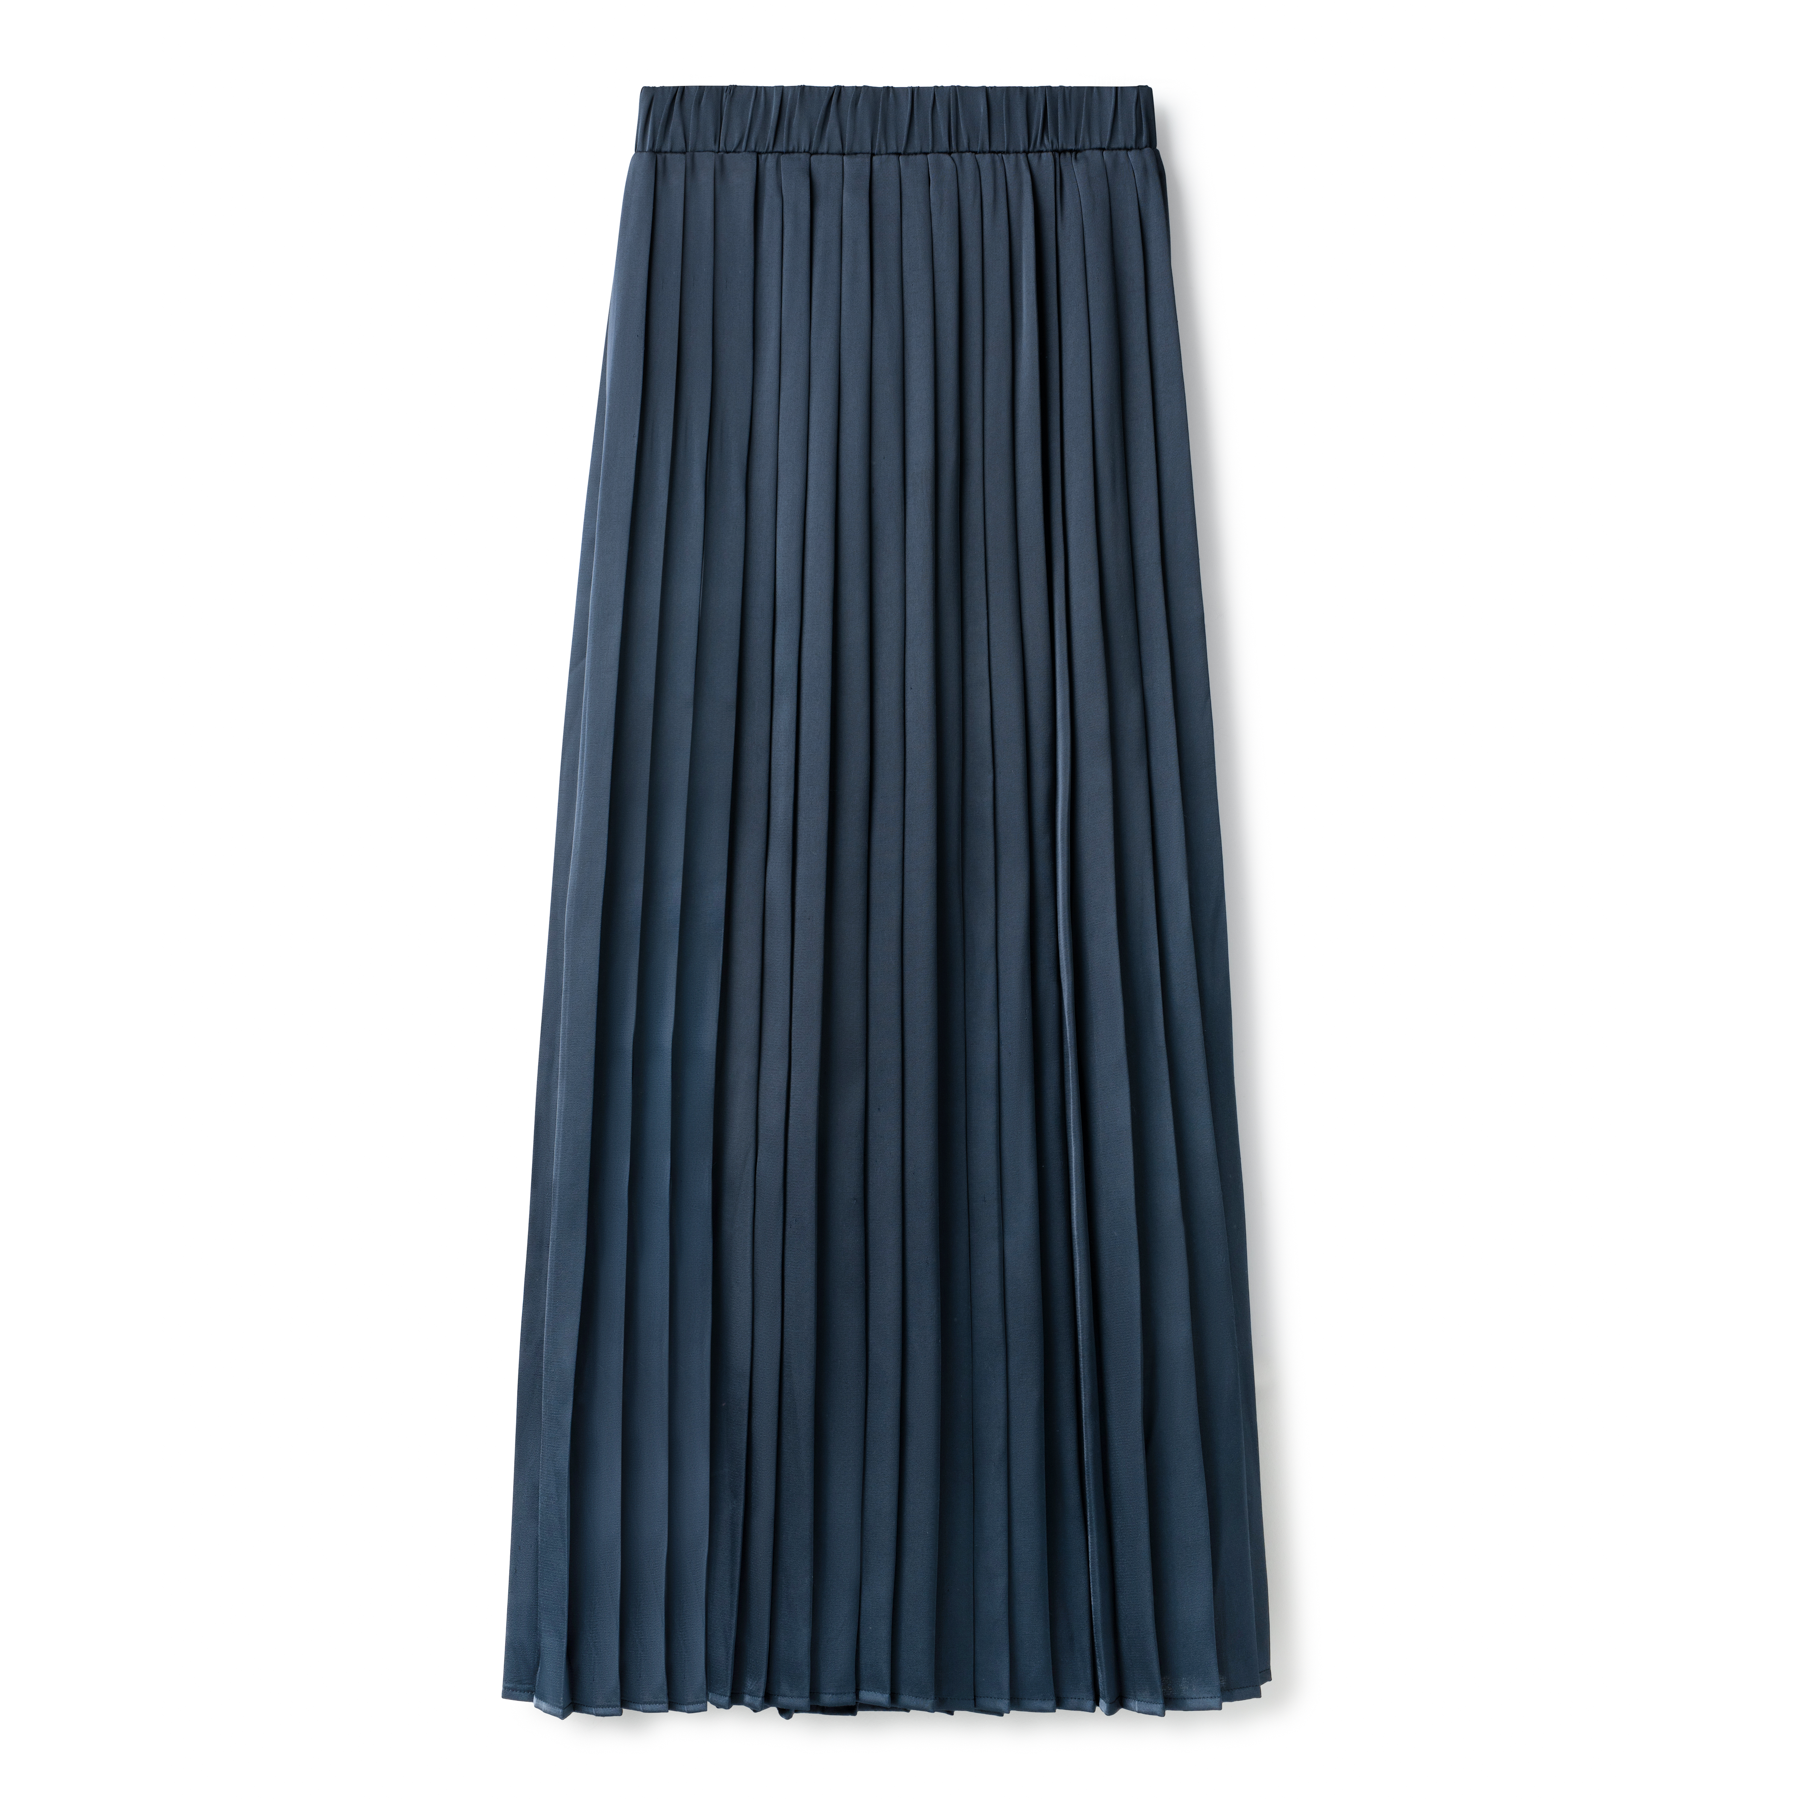 ALL- Skirts – IN:05NY